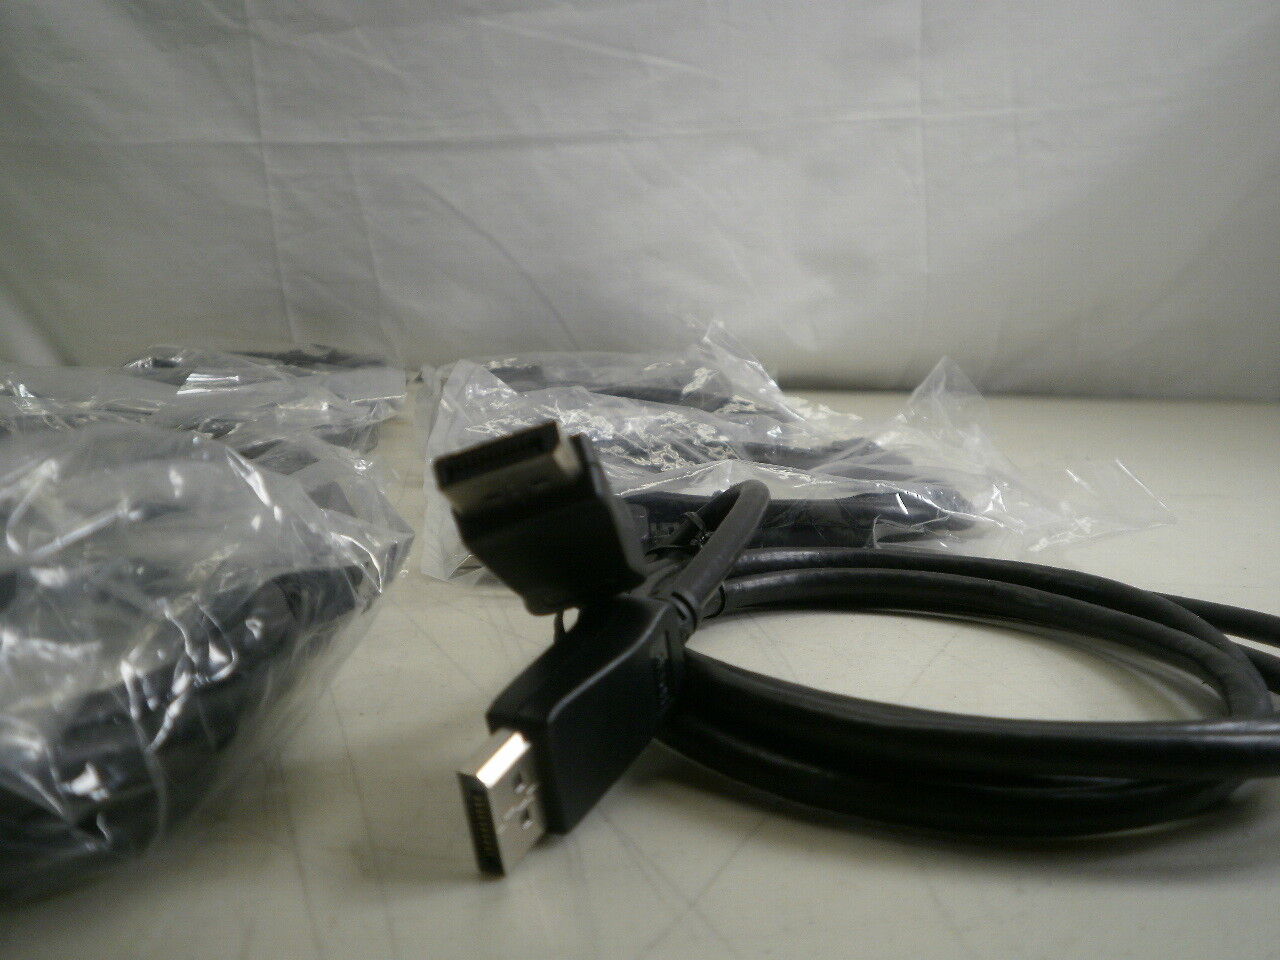 Lot of 11 6 Foot Display Port to Display Port Cables